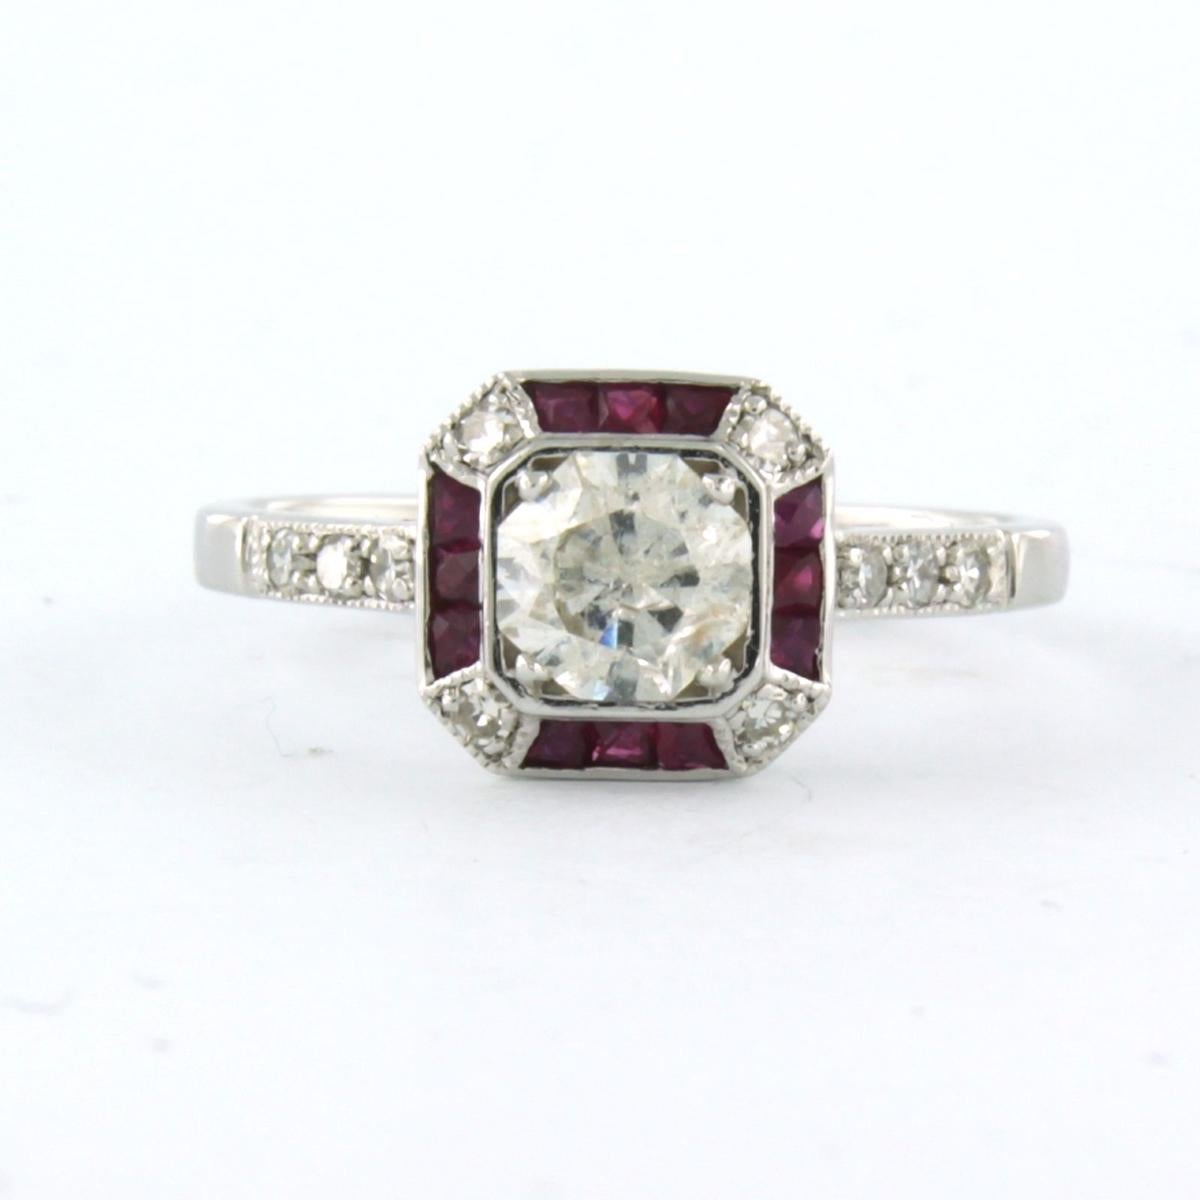 14k white gold ring set with ruby ​​0.30 ct and in the center an 8-side brilliant cut diamond 0.60 ct - H/I - pique infinity - and single cut cut diamond up to. 0.10ct - F/G - VS/SI - ring size 17.25 (54)

detailed description:

the top of the ring